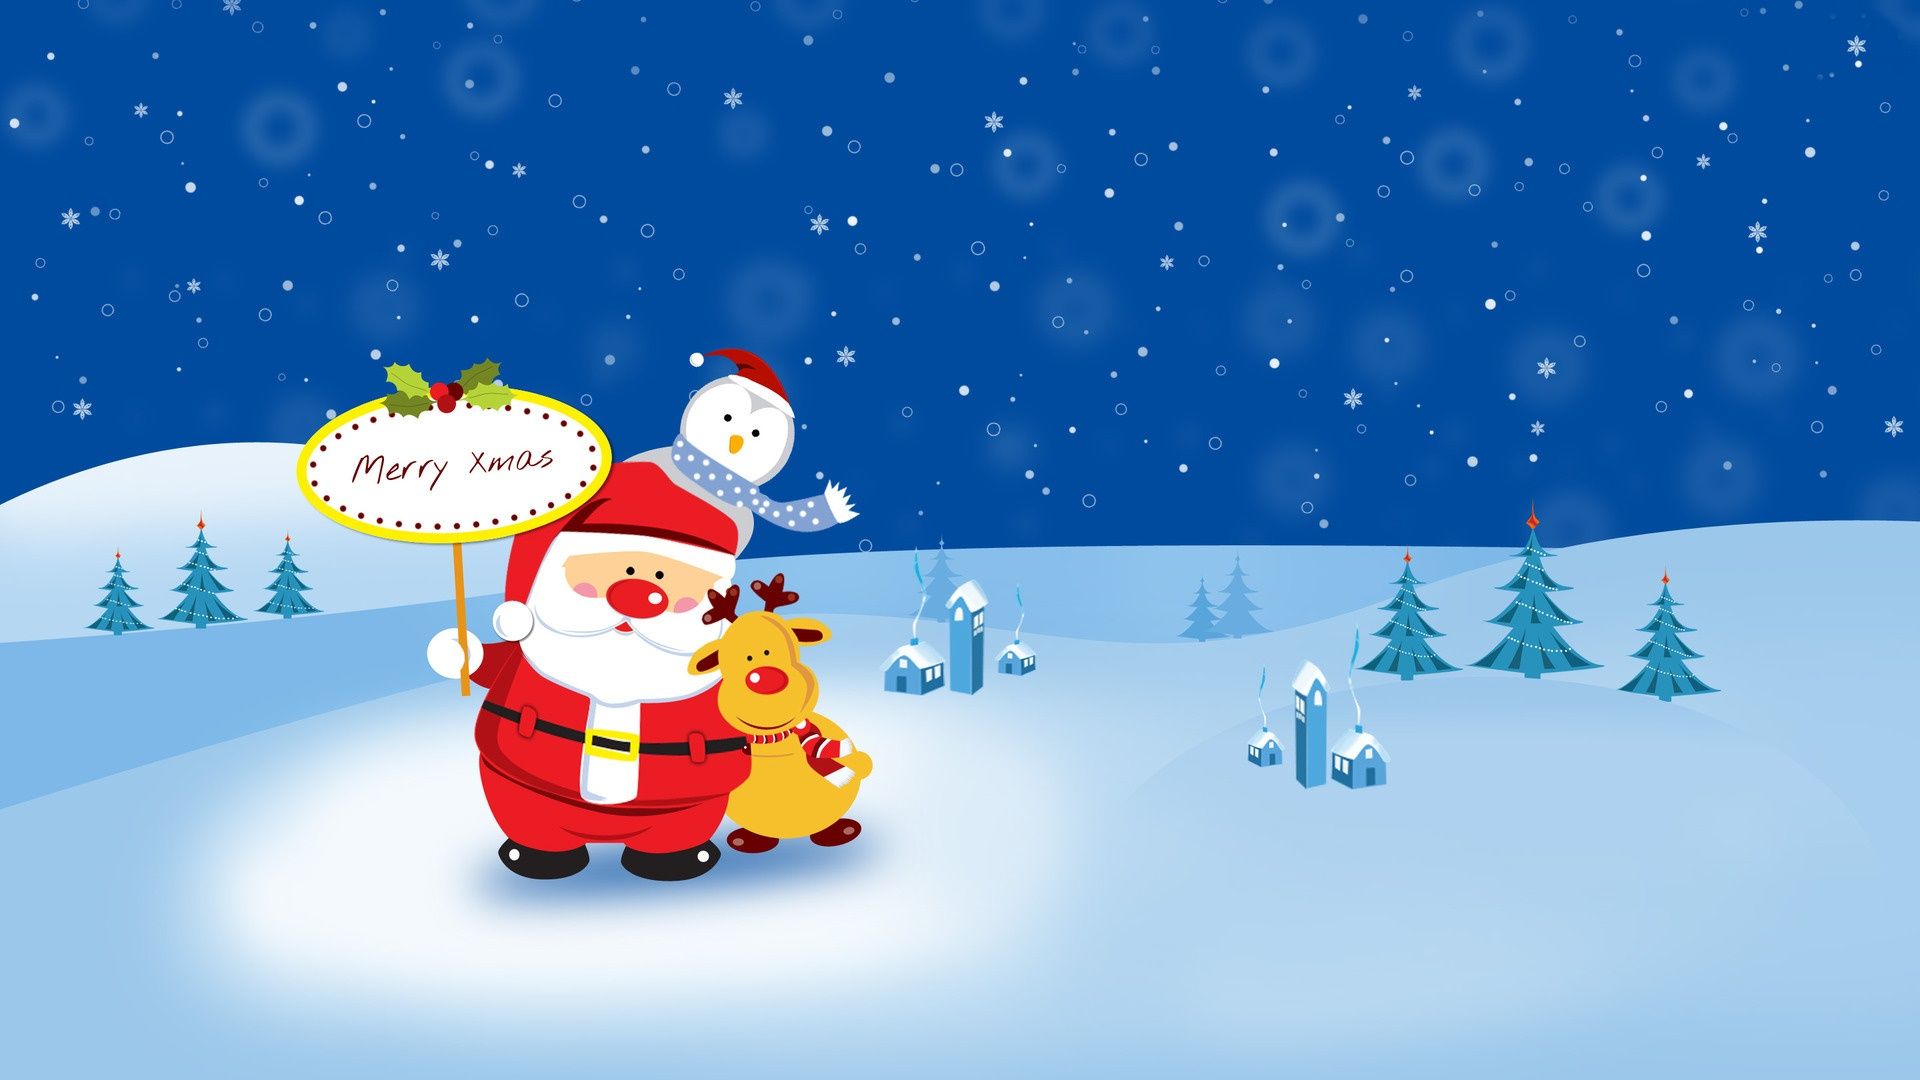 Cute Holiday s For iPhone wallpaper 1920x1080